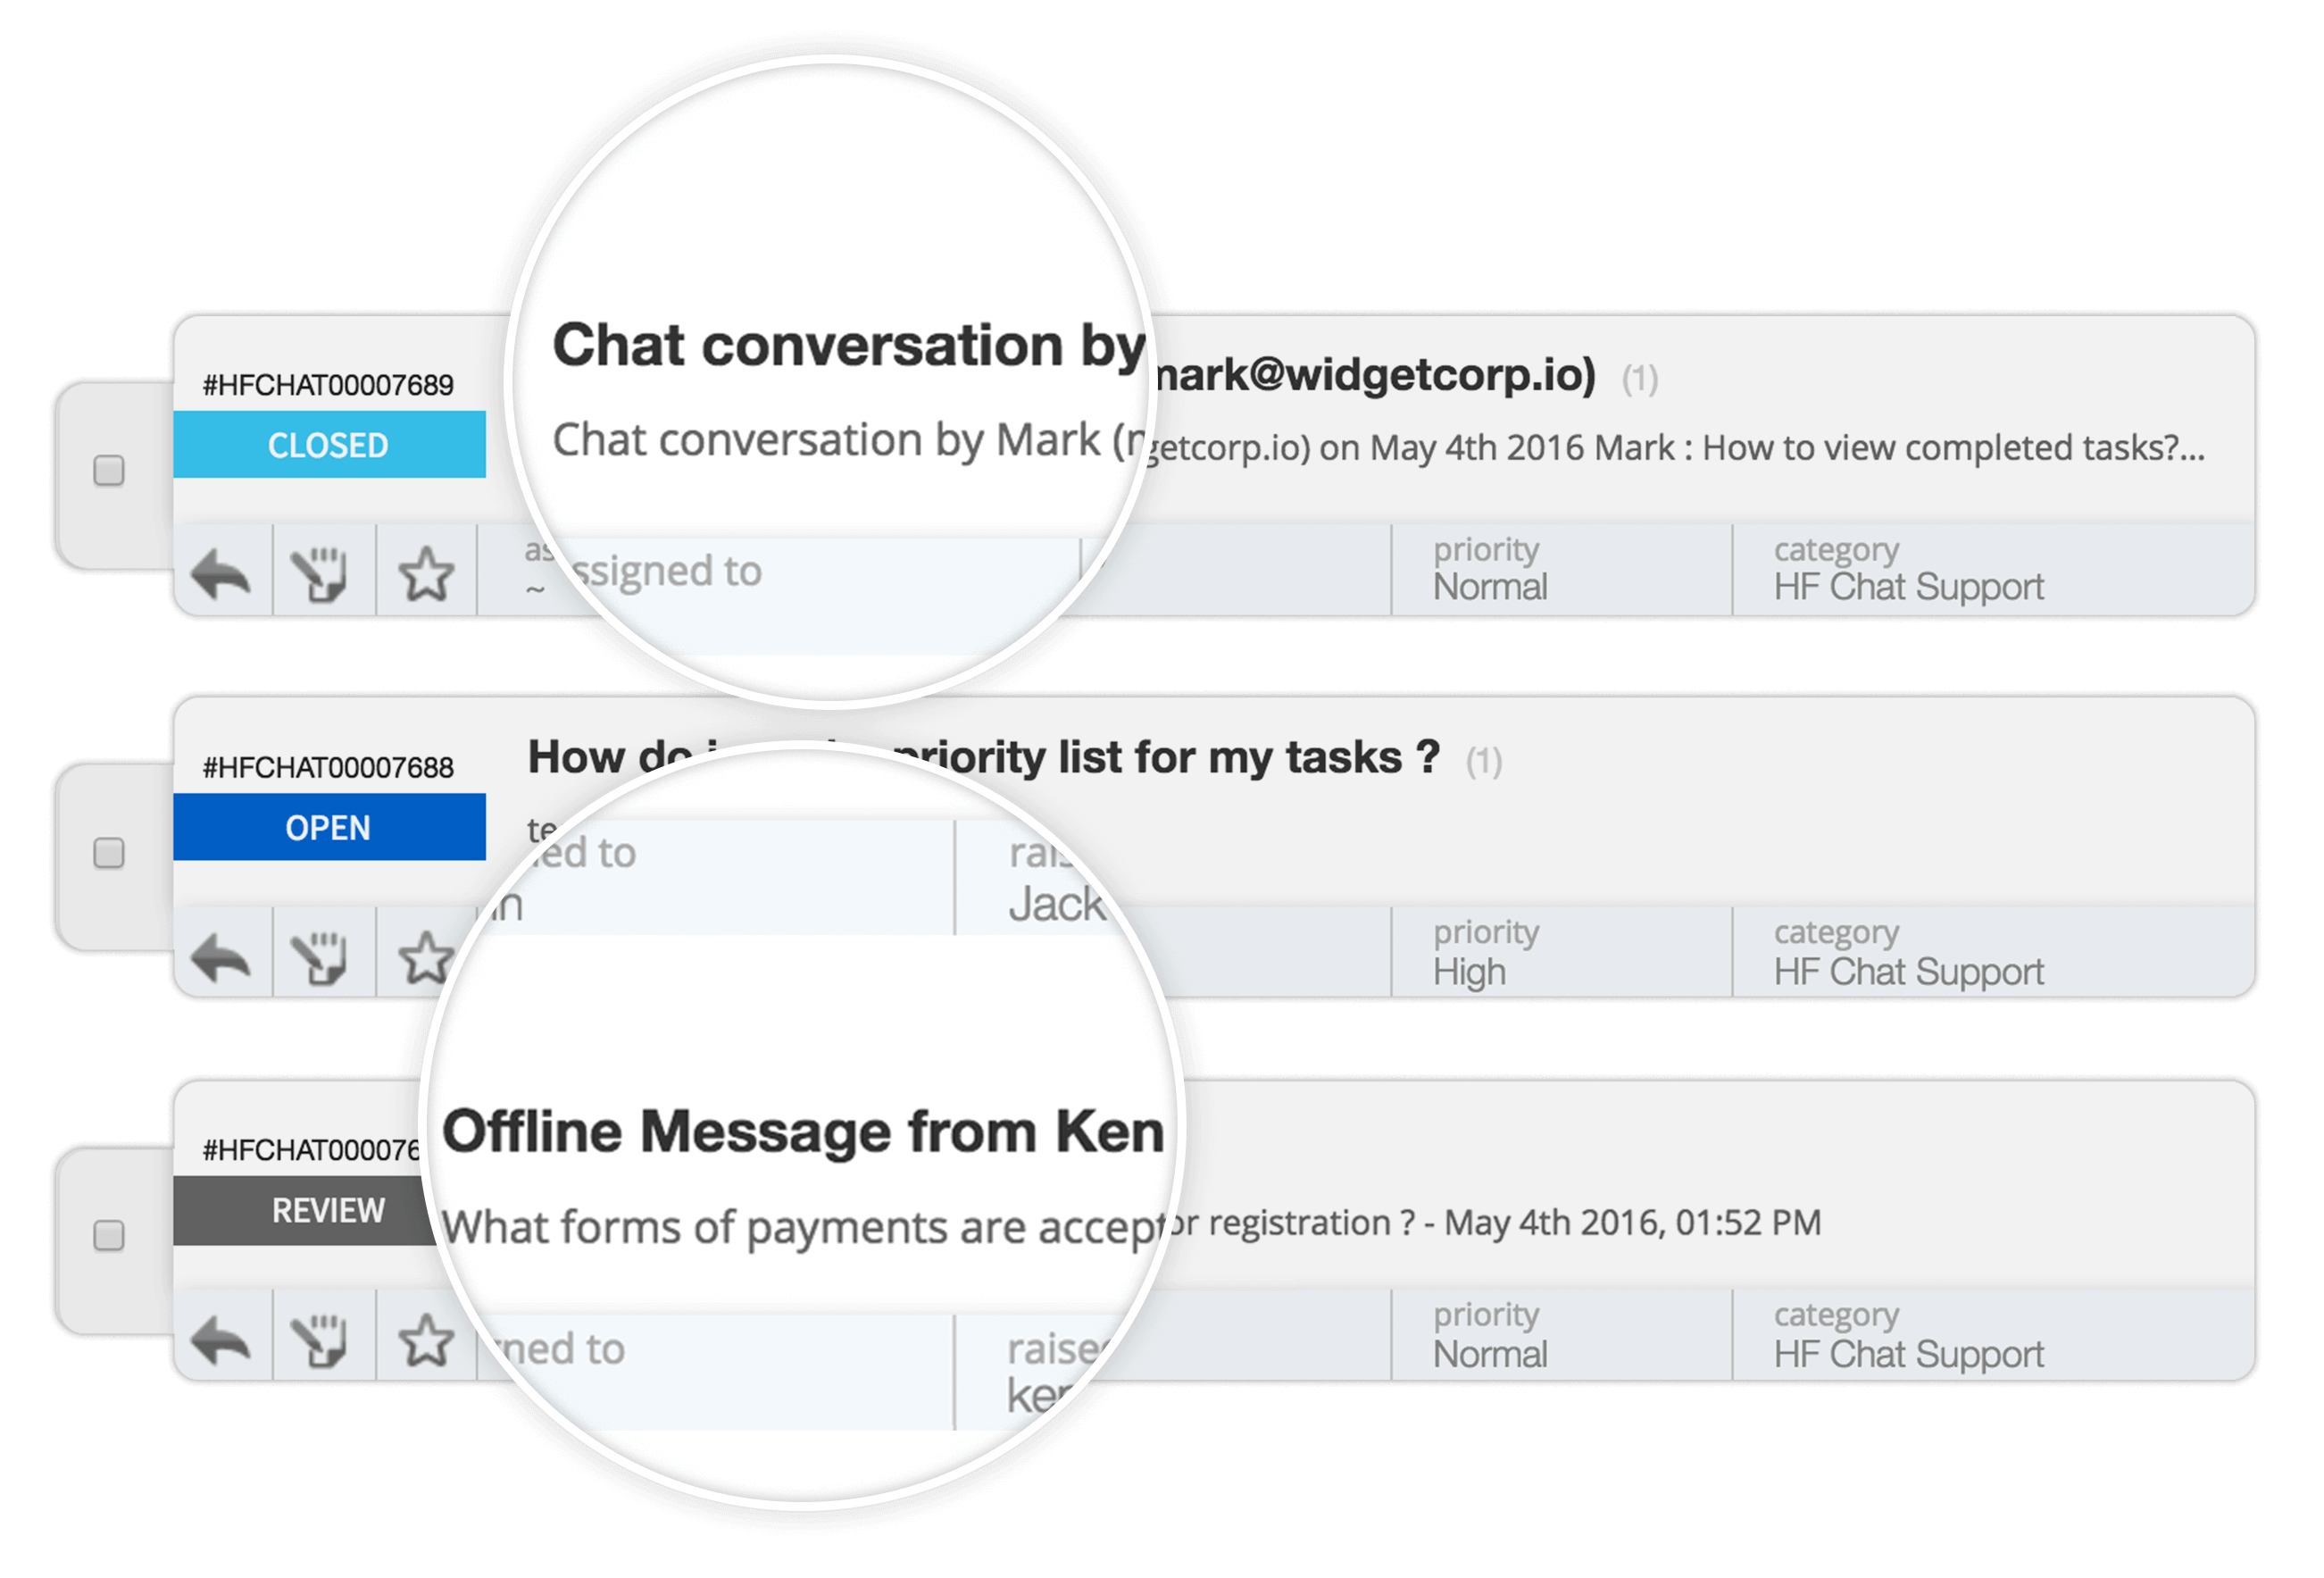 Convert all live chat conversations into help desk tickets